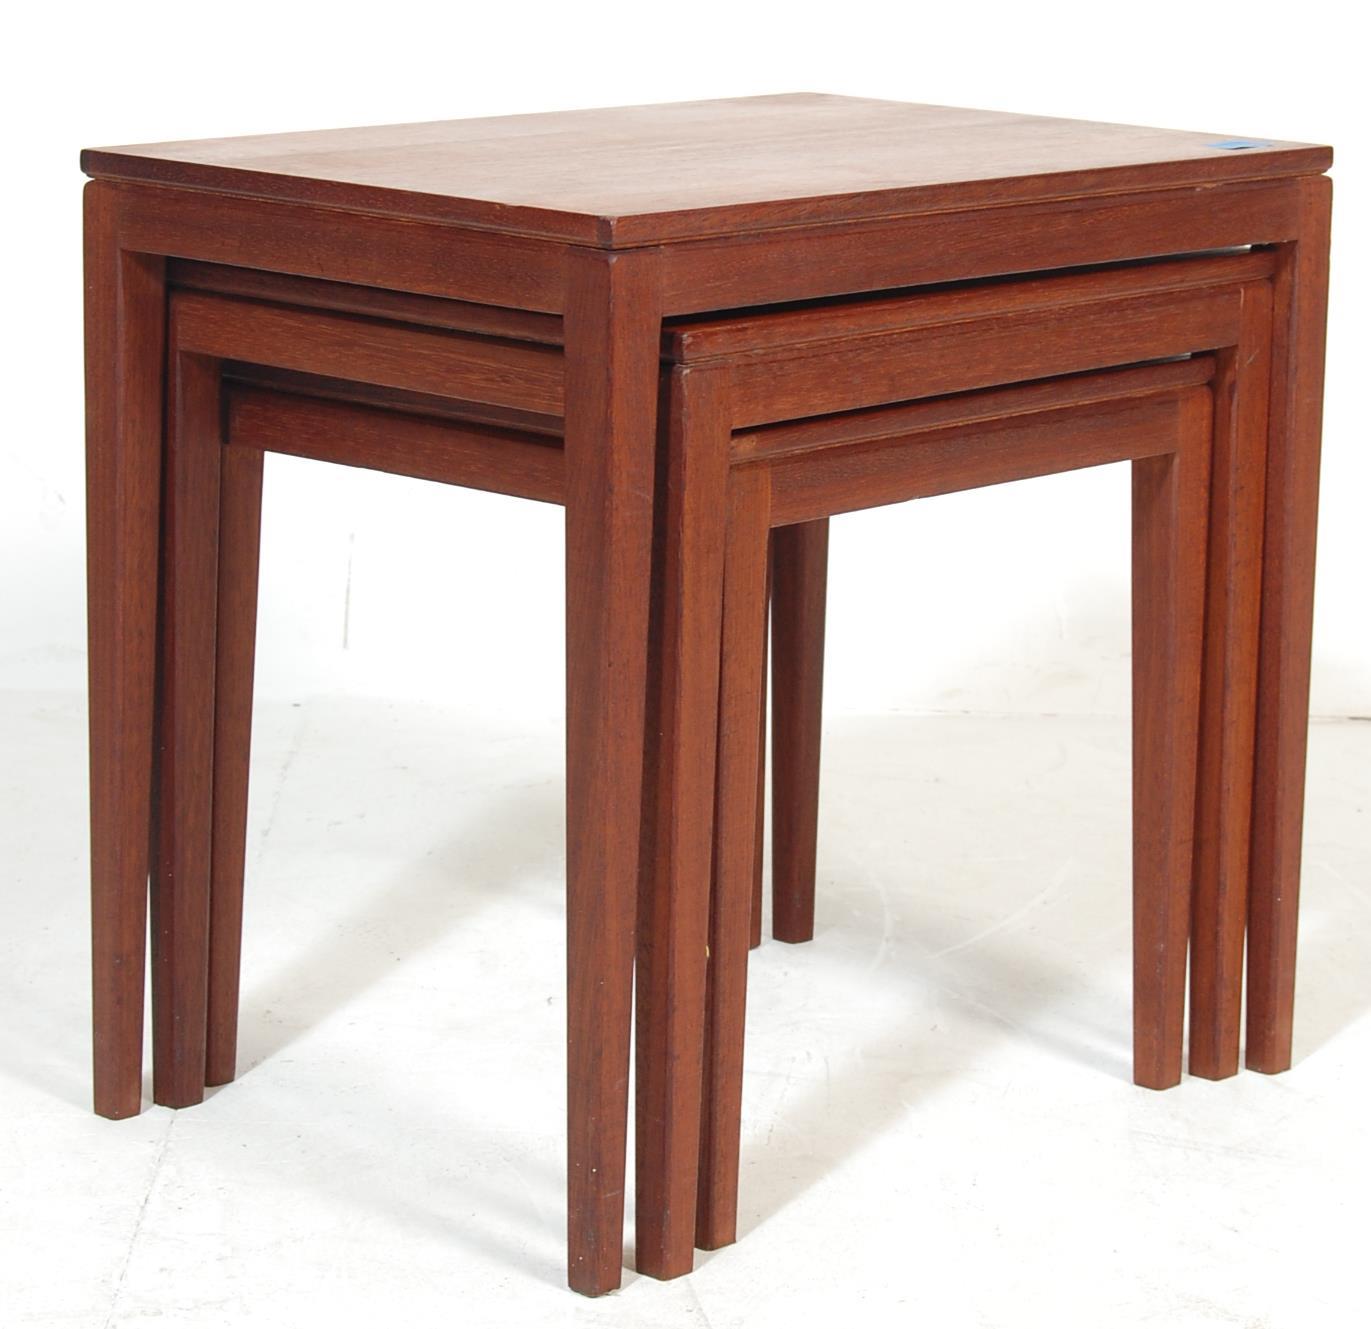 A VINTAGE 20TH CENTURY TEAK WOOD DANISH INSPIRED NEST OF TABLES - Image 5 of 5